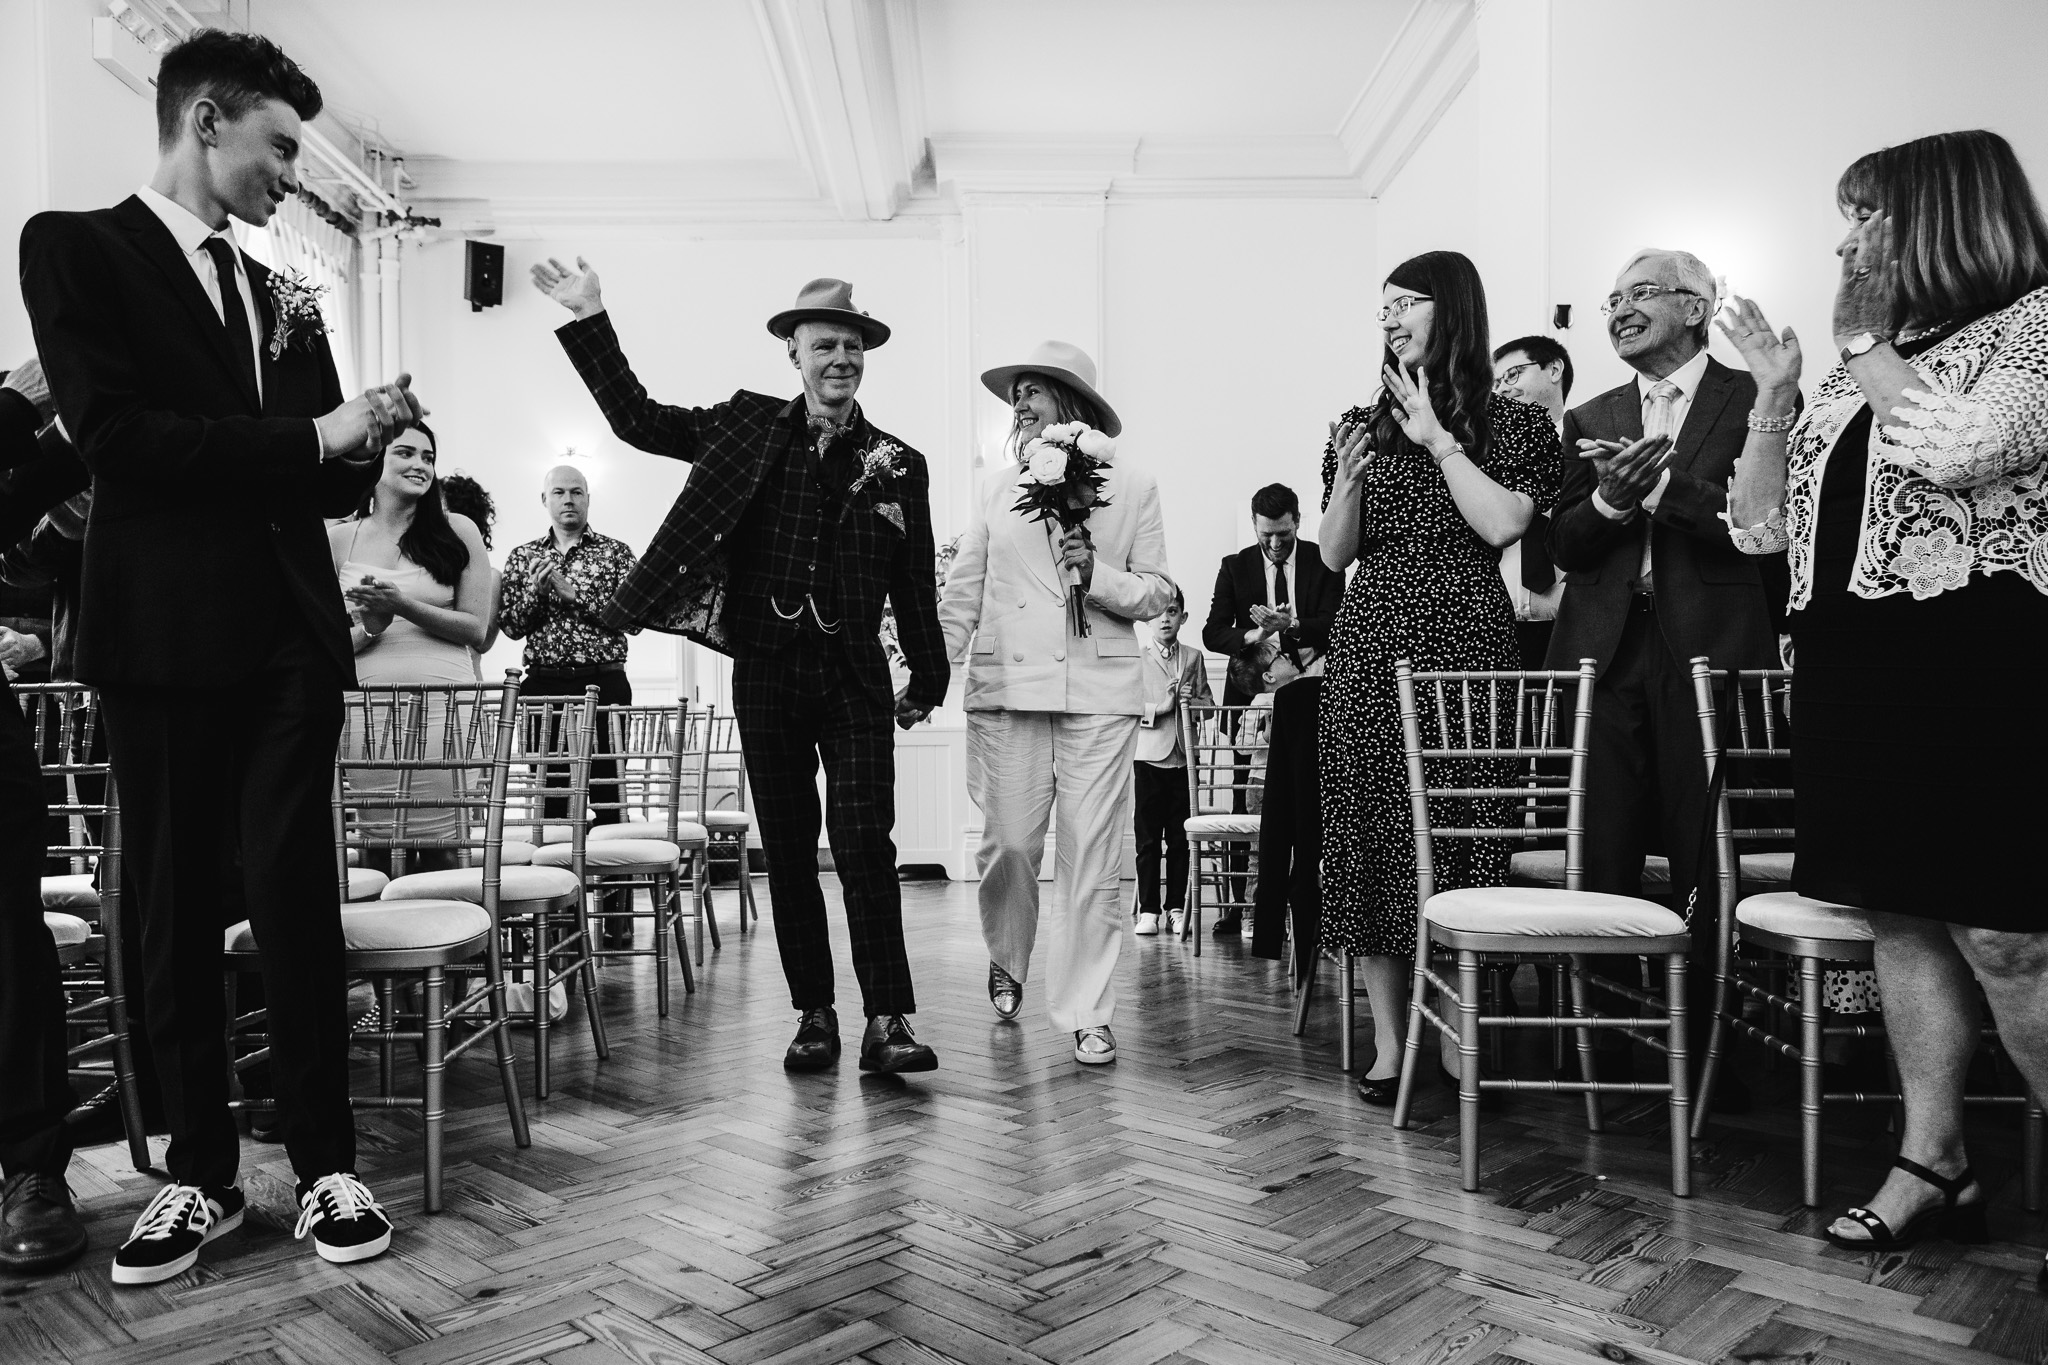 Mary and Mike walk down the aisle together whilst their guests clap on either side of them at Brighton Town Hall.